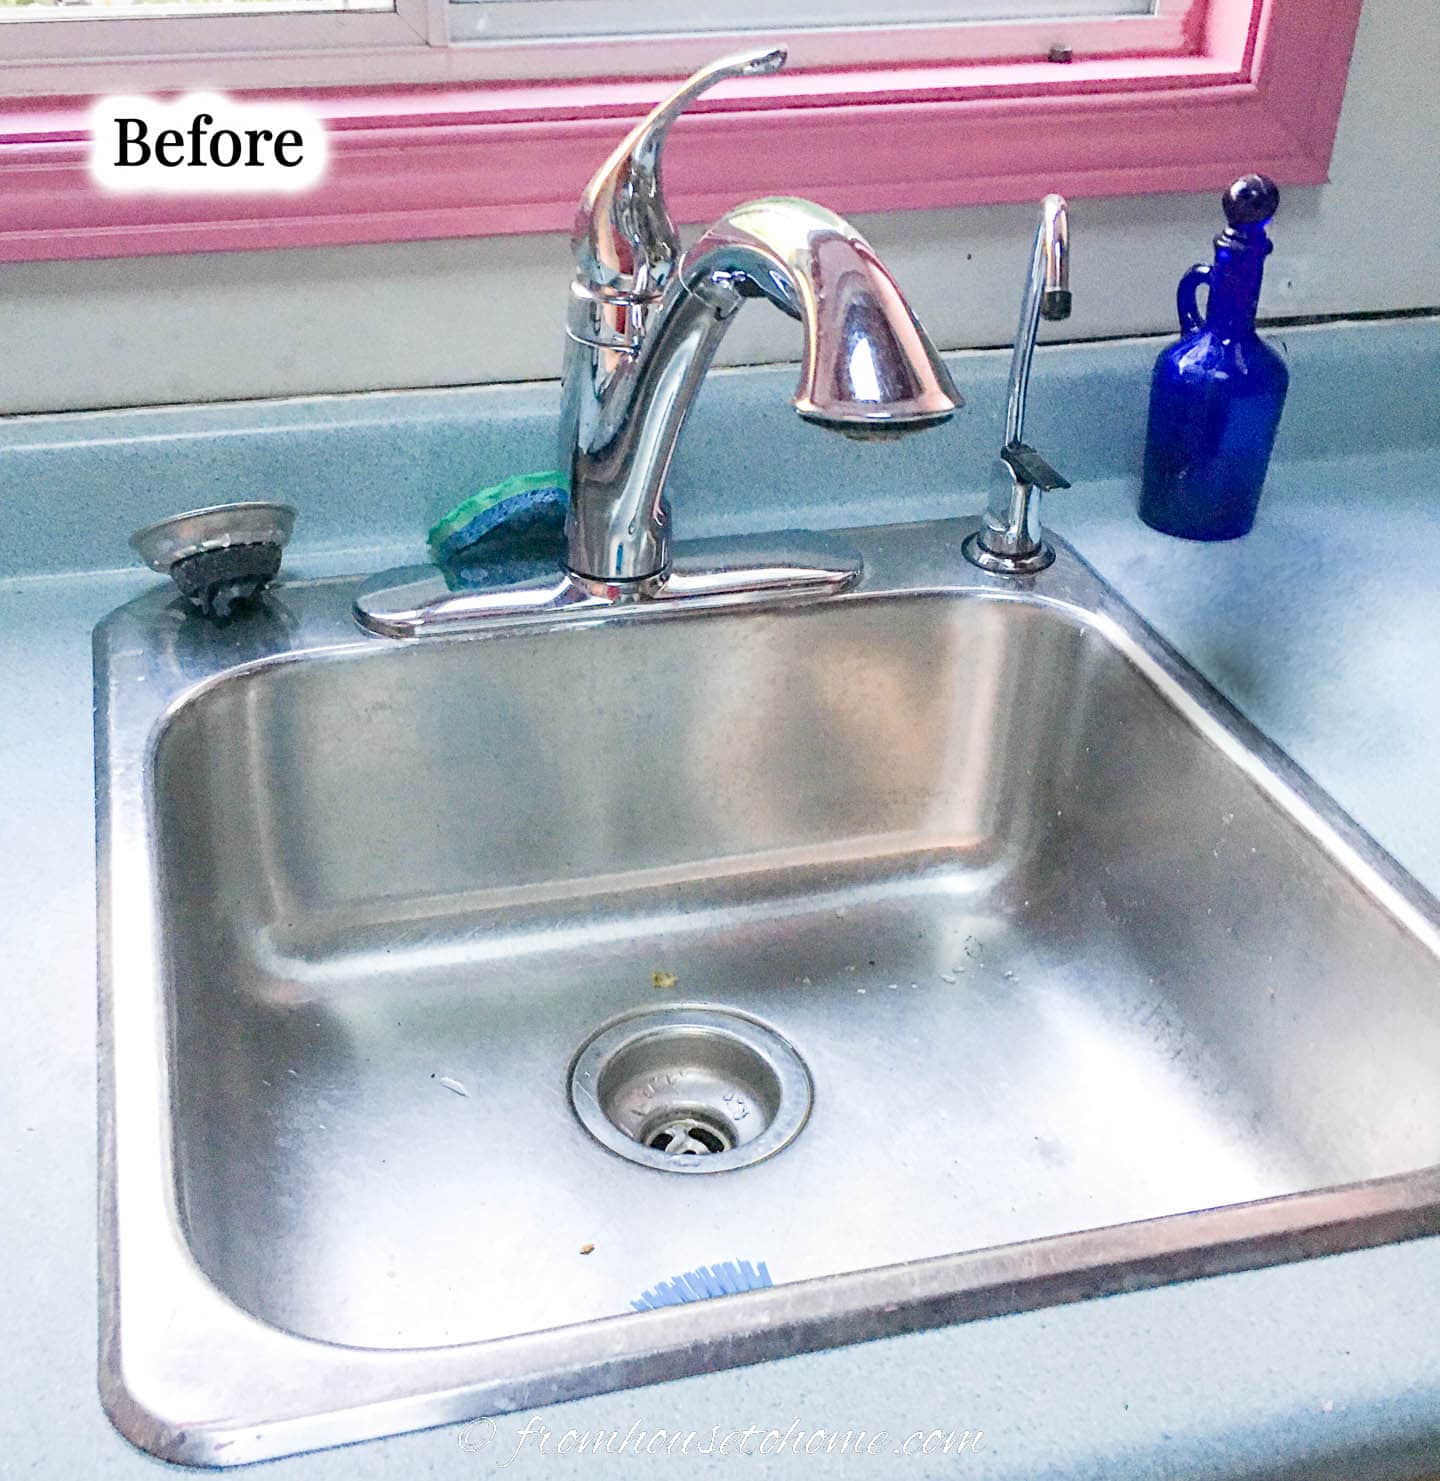 "Before" picture of the sink and faucet